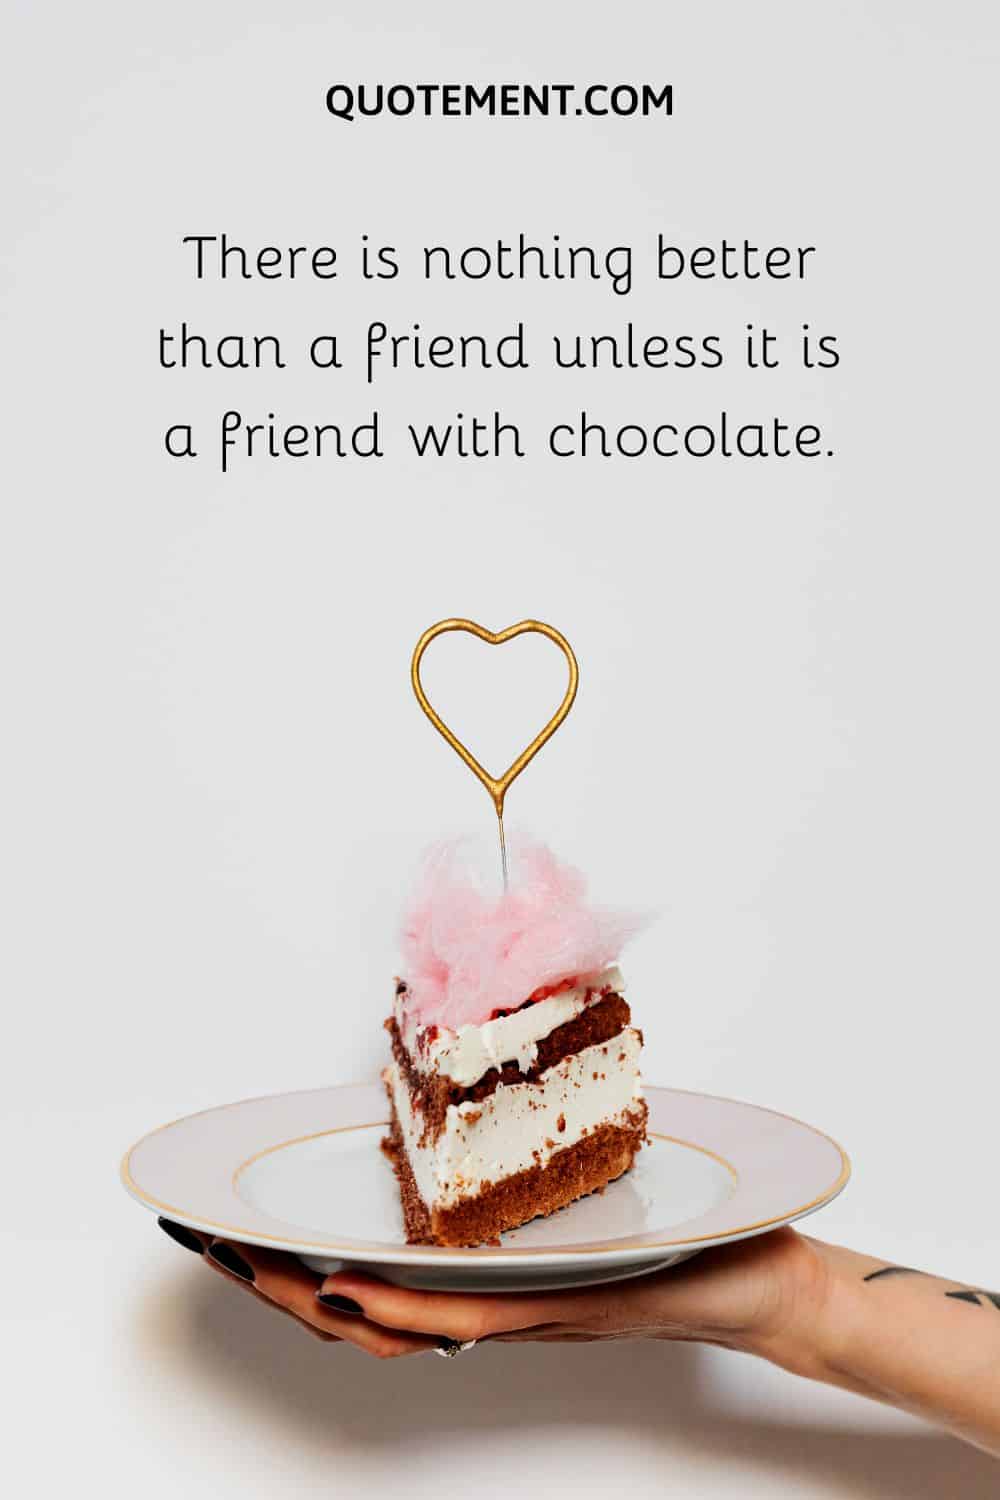 There is nothing better than a friend unless it is a friend with chocolate